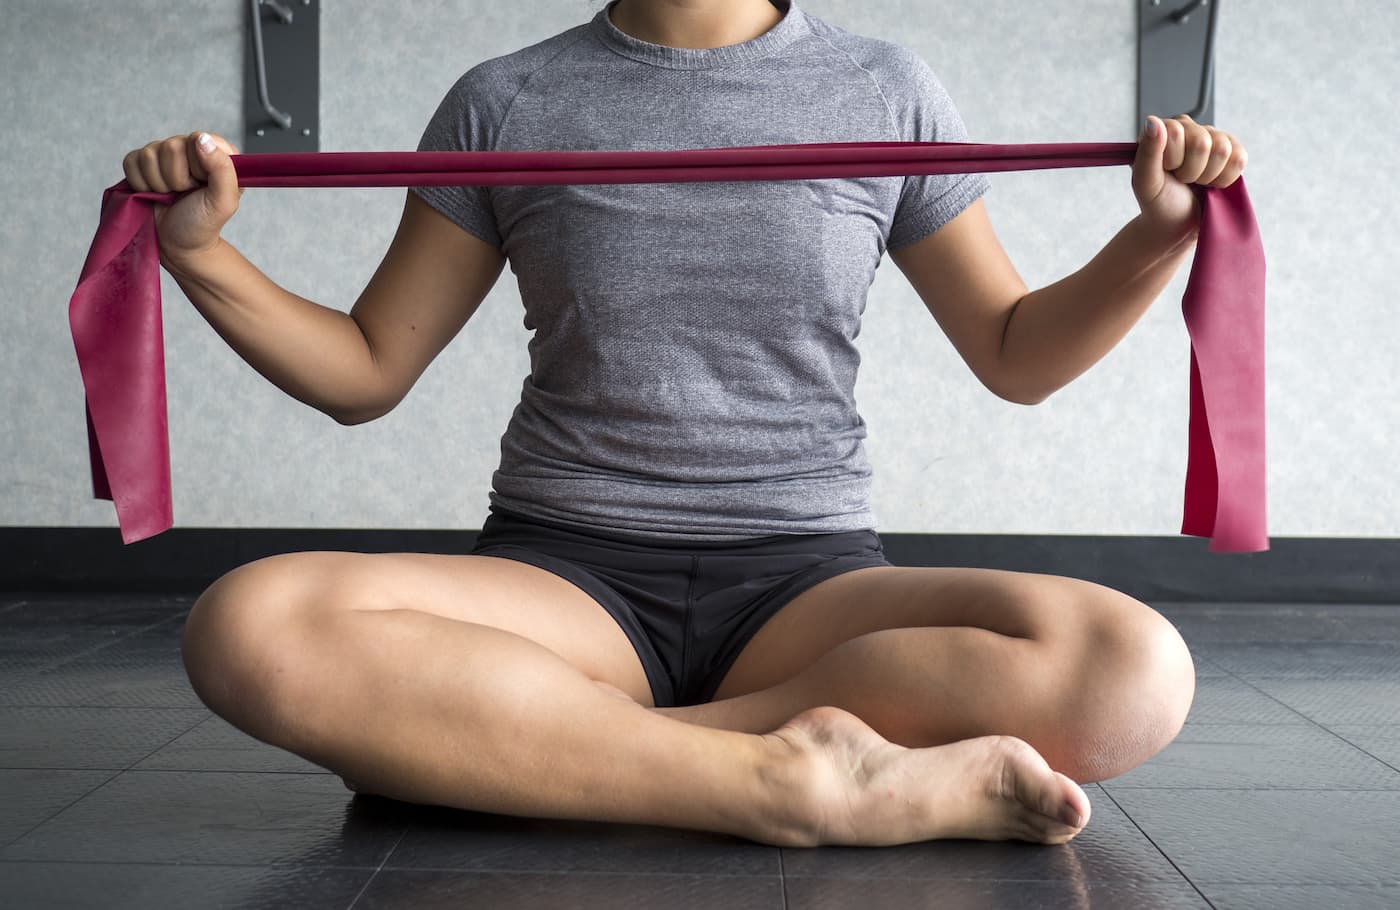 Exercises To Help Build Strength In Your Legs